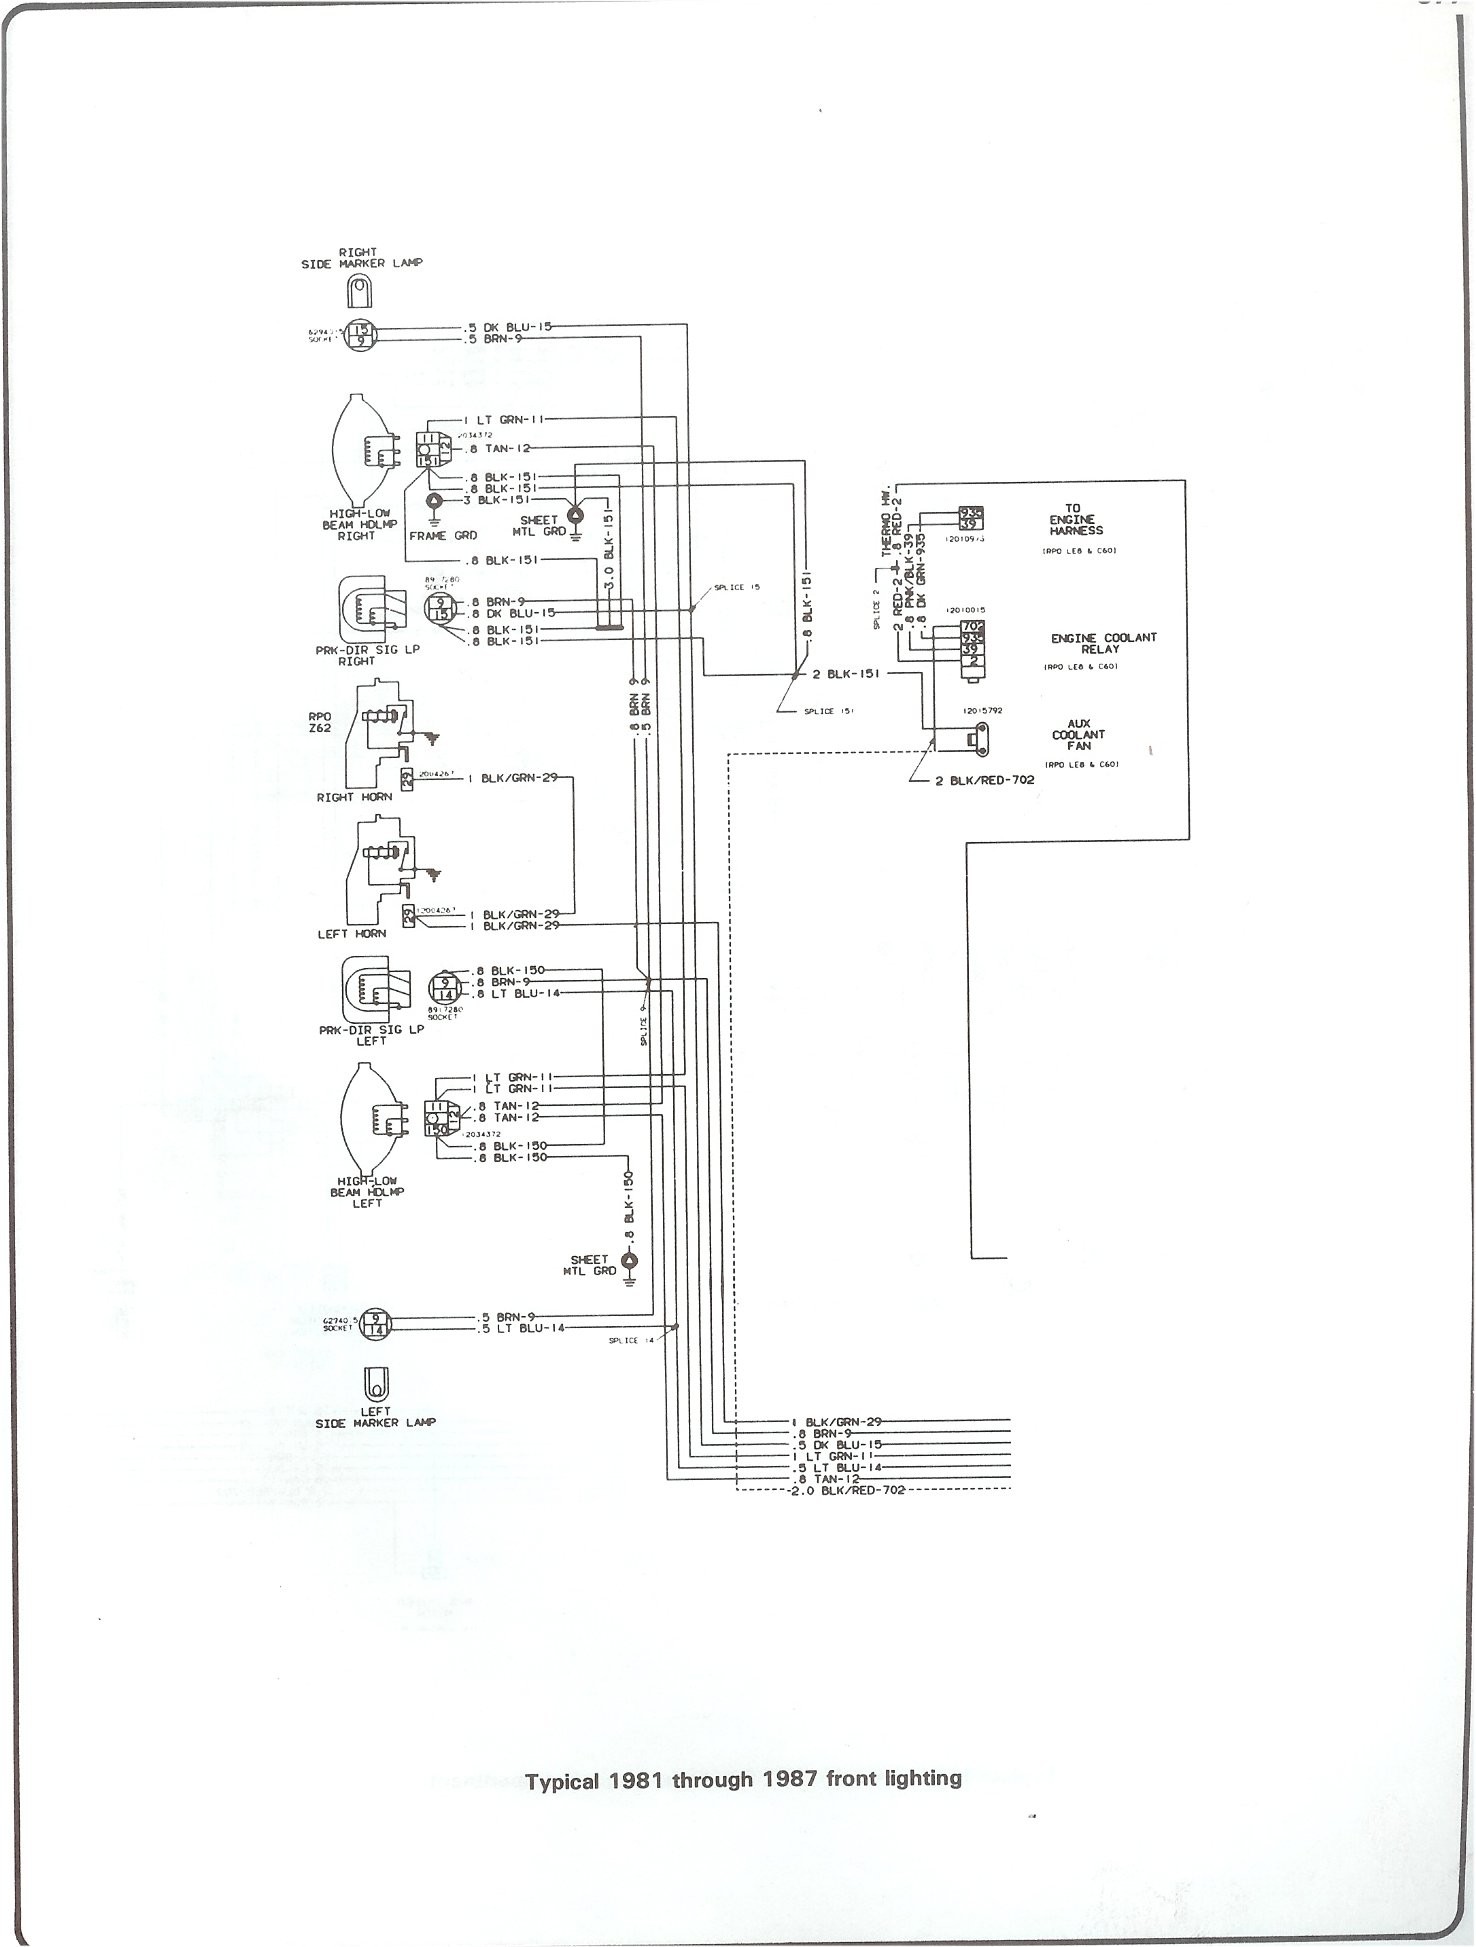 How to Wire Tcc On 1984 K10 1984 Chevy K10 Truck Color Wiring Diagram Of How to Wire Tcc On 1984 K10